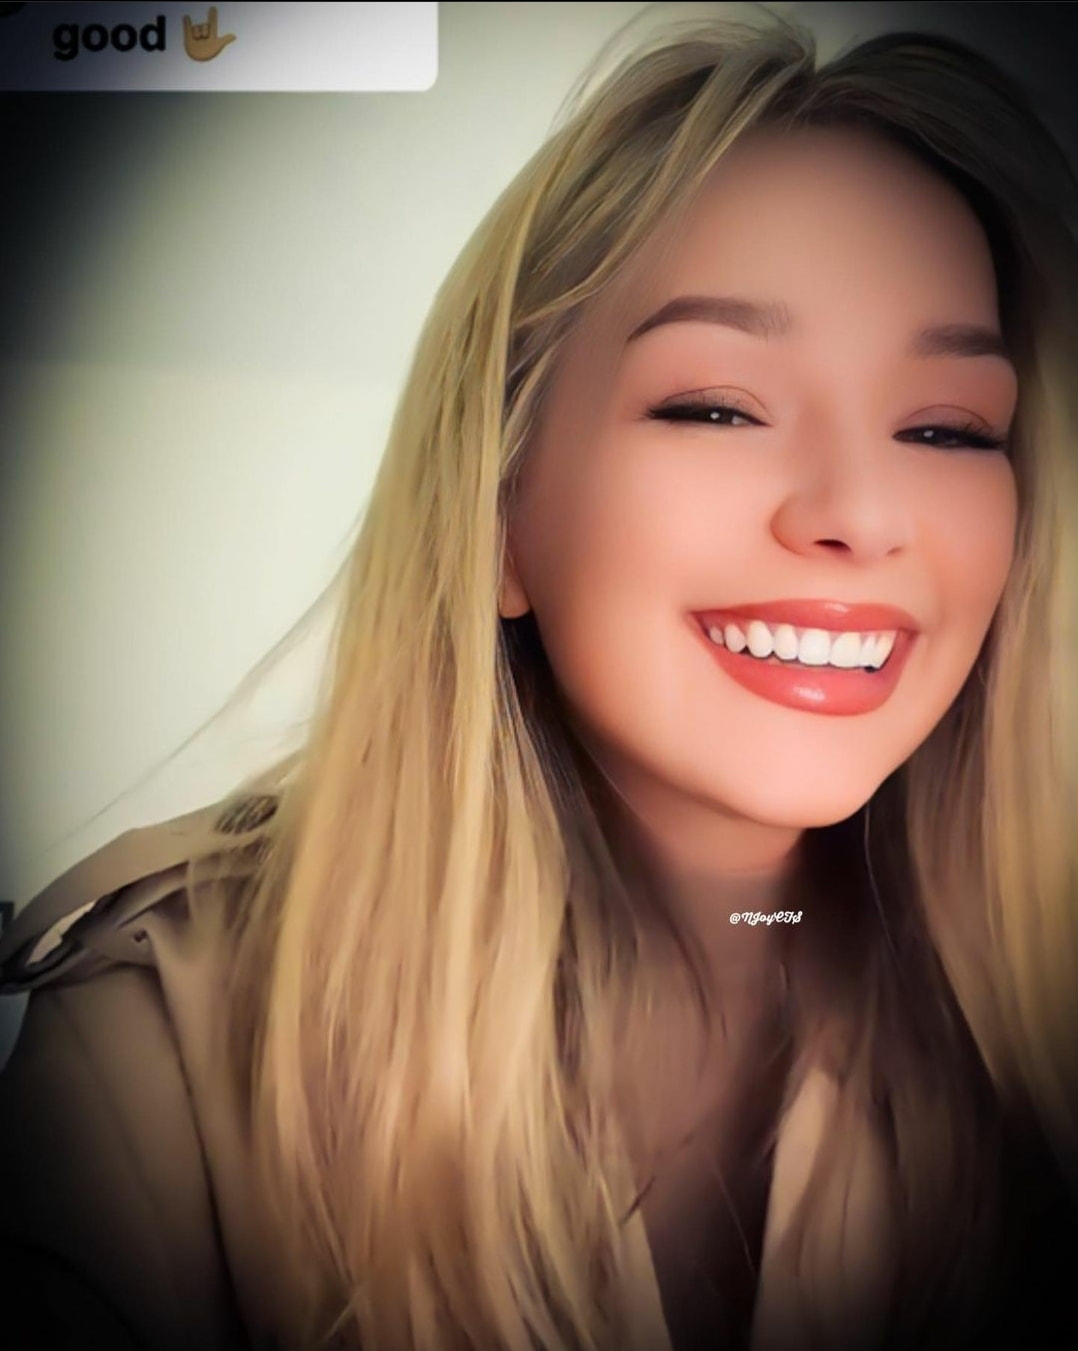 Connie Talbot shares her stunning, coming-of-age EP 'Growing Pains